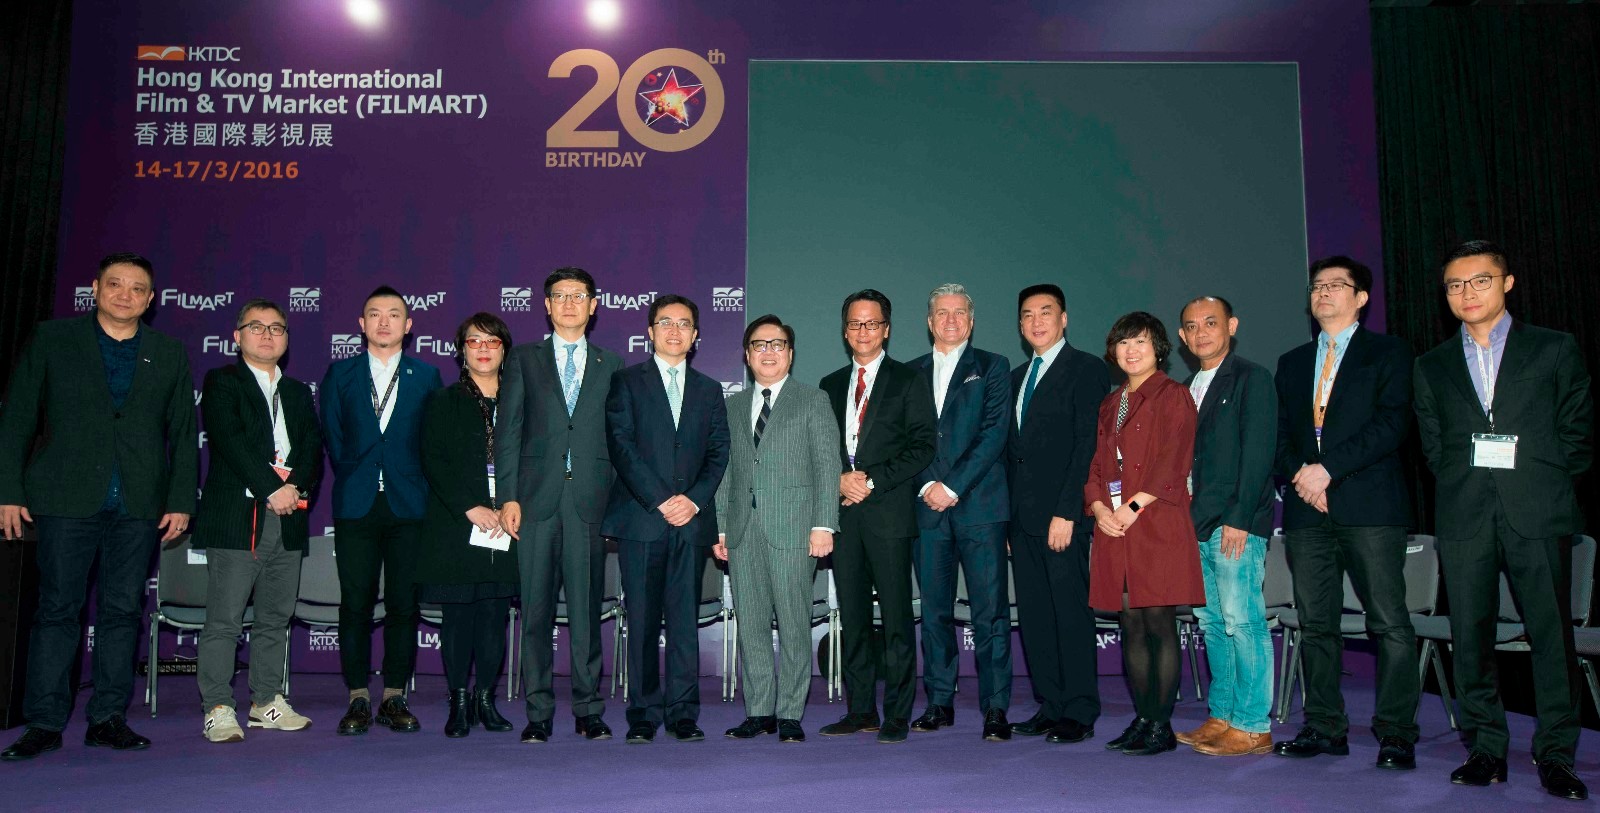 China Daily Roundtable at FILMART: “International Brought by China Film Industry’s Globalization”